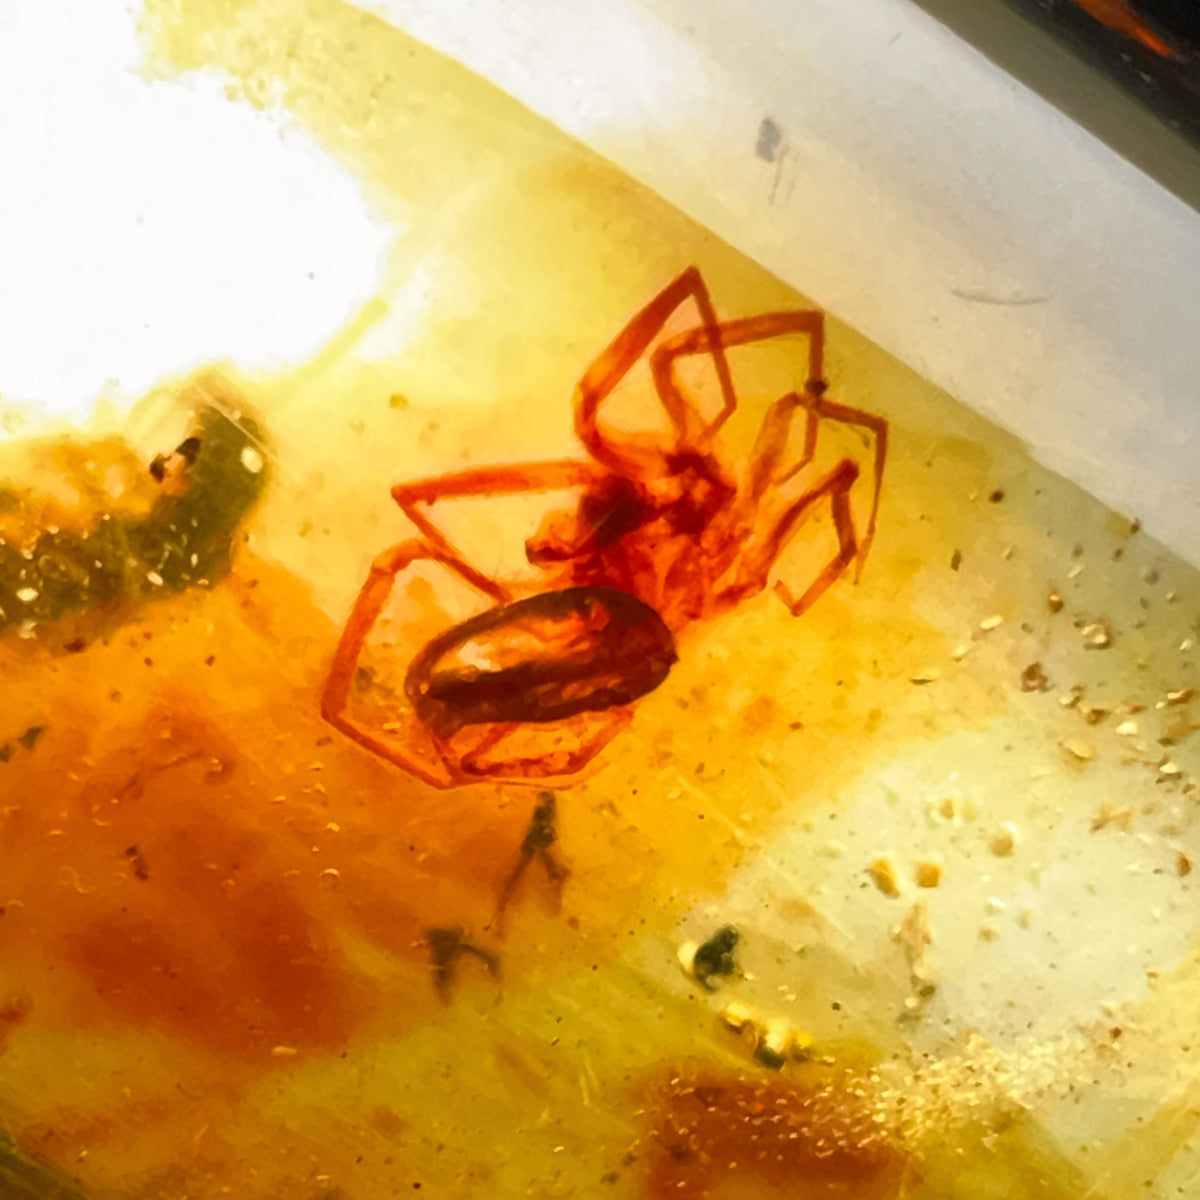 Spider inside of Young Amber Colombia